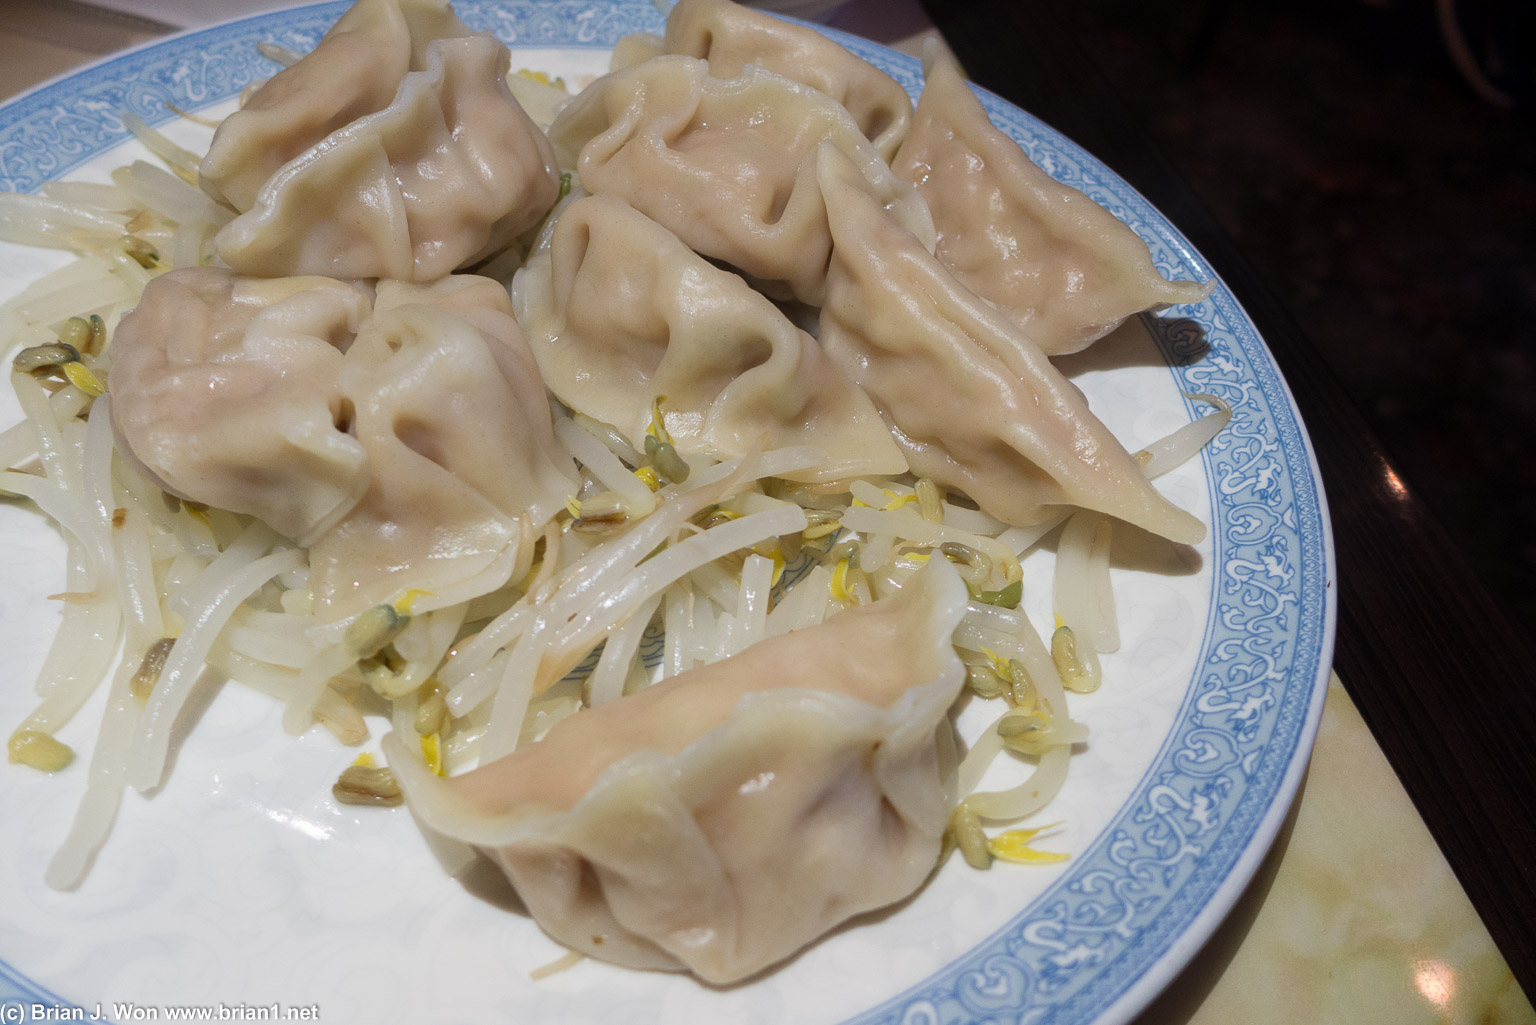 Dumplings were mediocre, taste was best described as indifferent. And why bean sprouts?